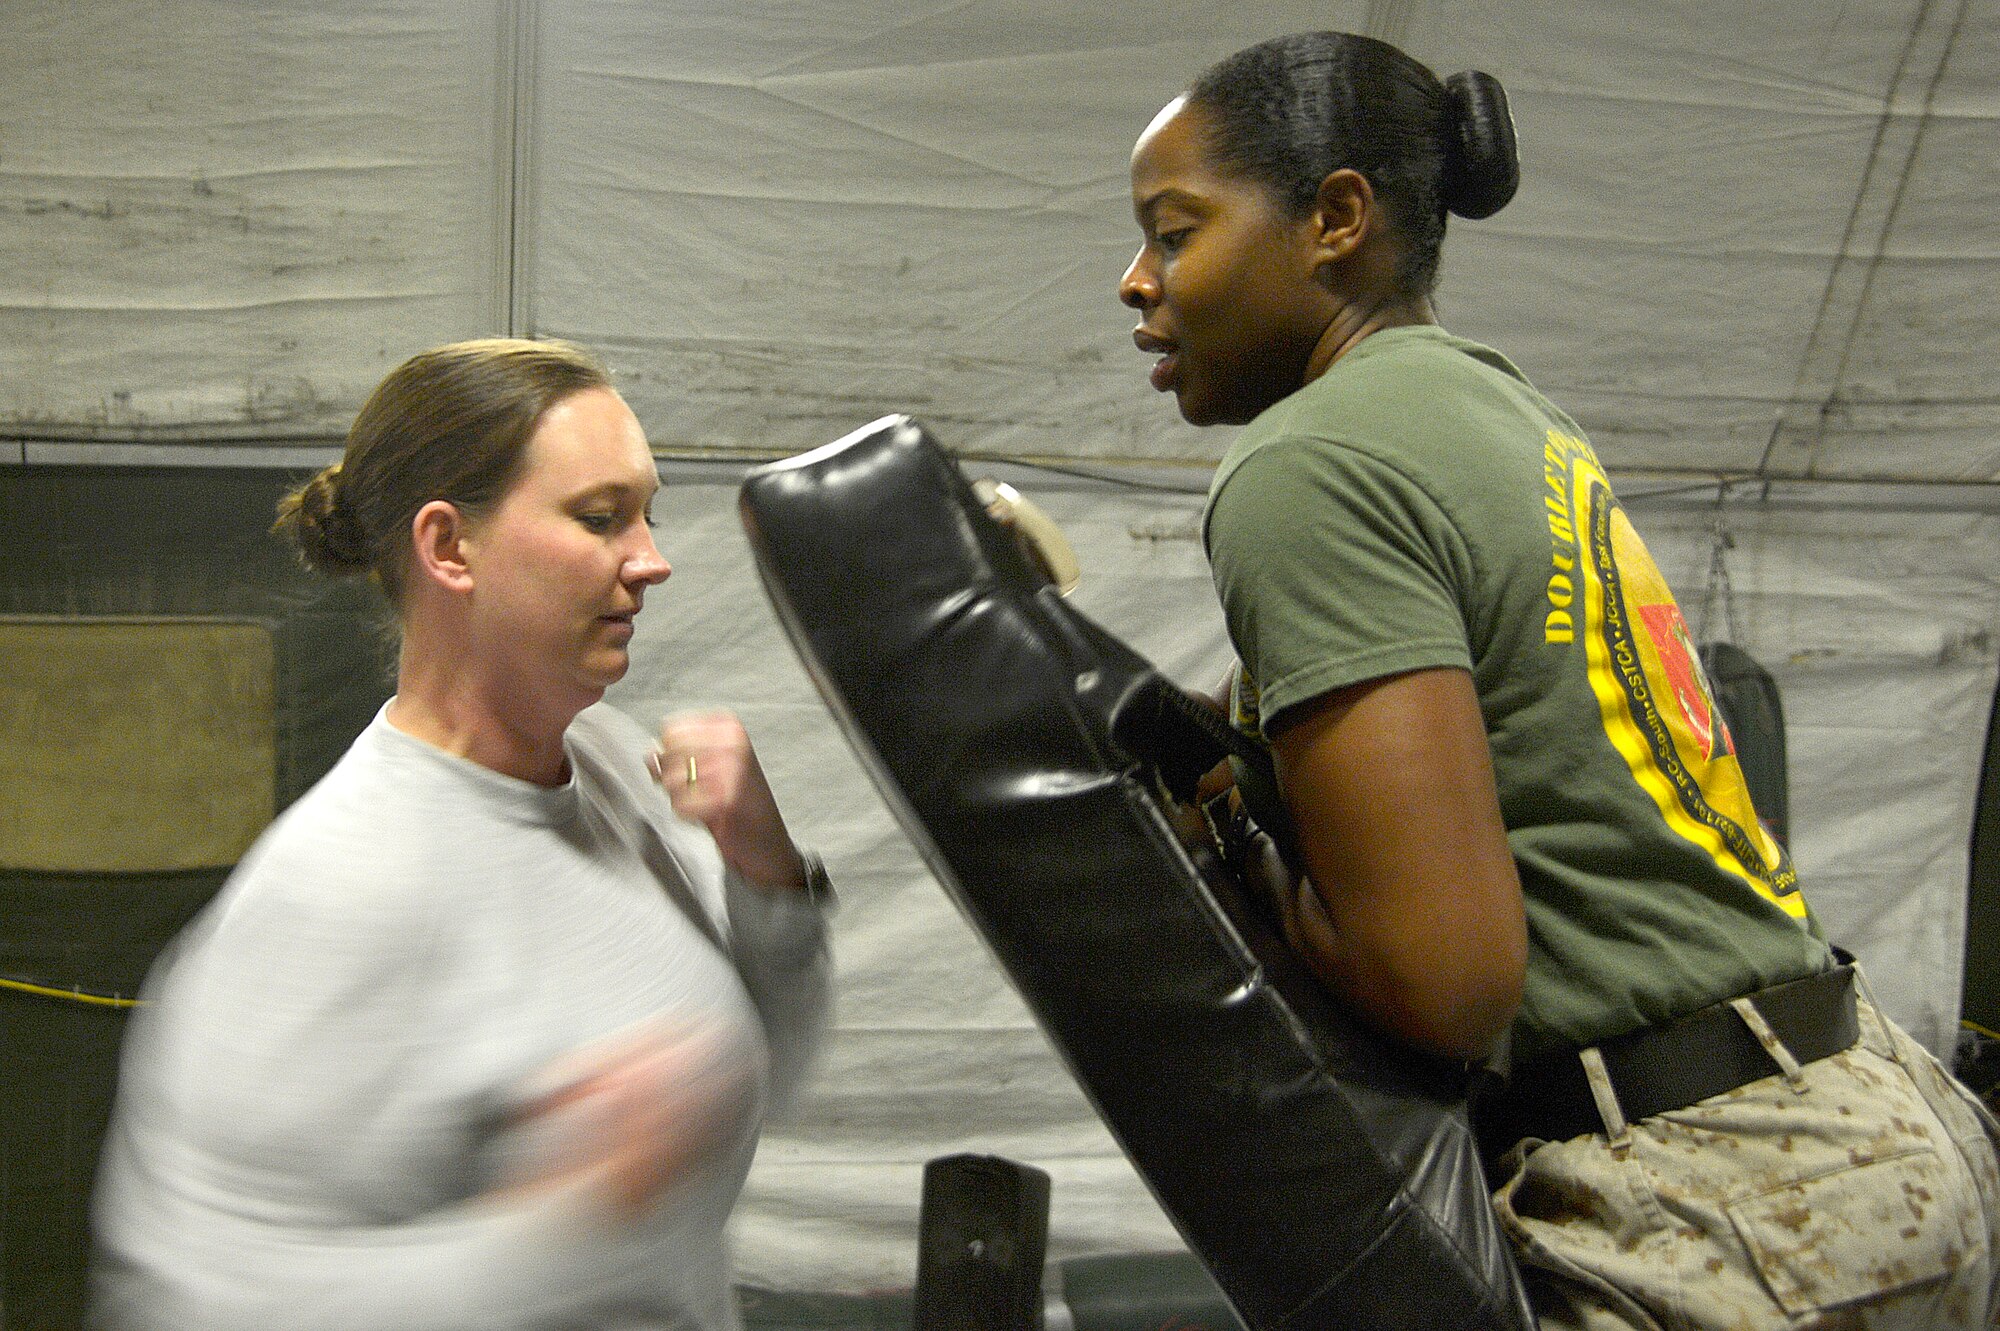 U.S. Air Force Capt. Jamie Woodson, 455th Expeditionary Medical Group primary care physician’s assistant, performs a right uppercut during the women’s self-defense class at Bagram Airfield, Afghanistan, Dec. 29, 2013. The class is held every Sunday from 3-5 p.m., and features techniques used in U.S. Marine Corps mixed martial arts. Woodson is deployed from Elmendorf Air Force Base, Alaska, and is a native of Florida. (U.S. Air Force photo by Senior Airman Kayla Newman/Released)